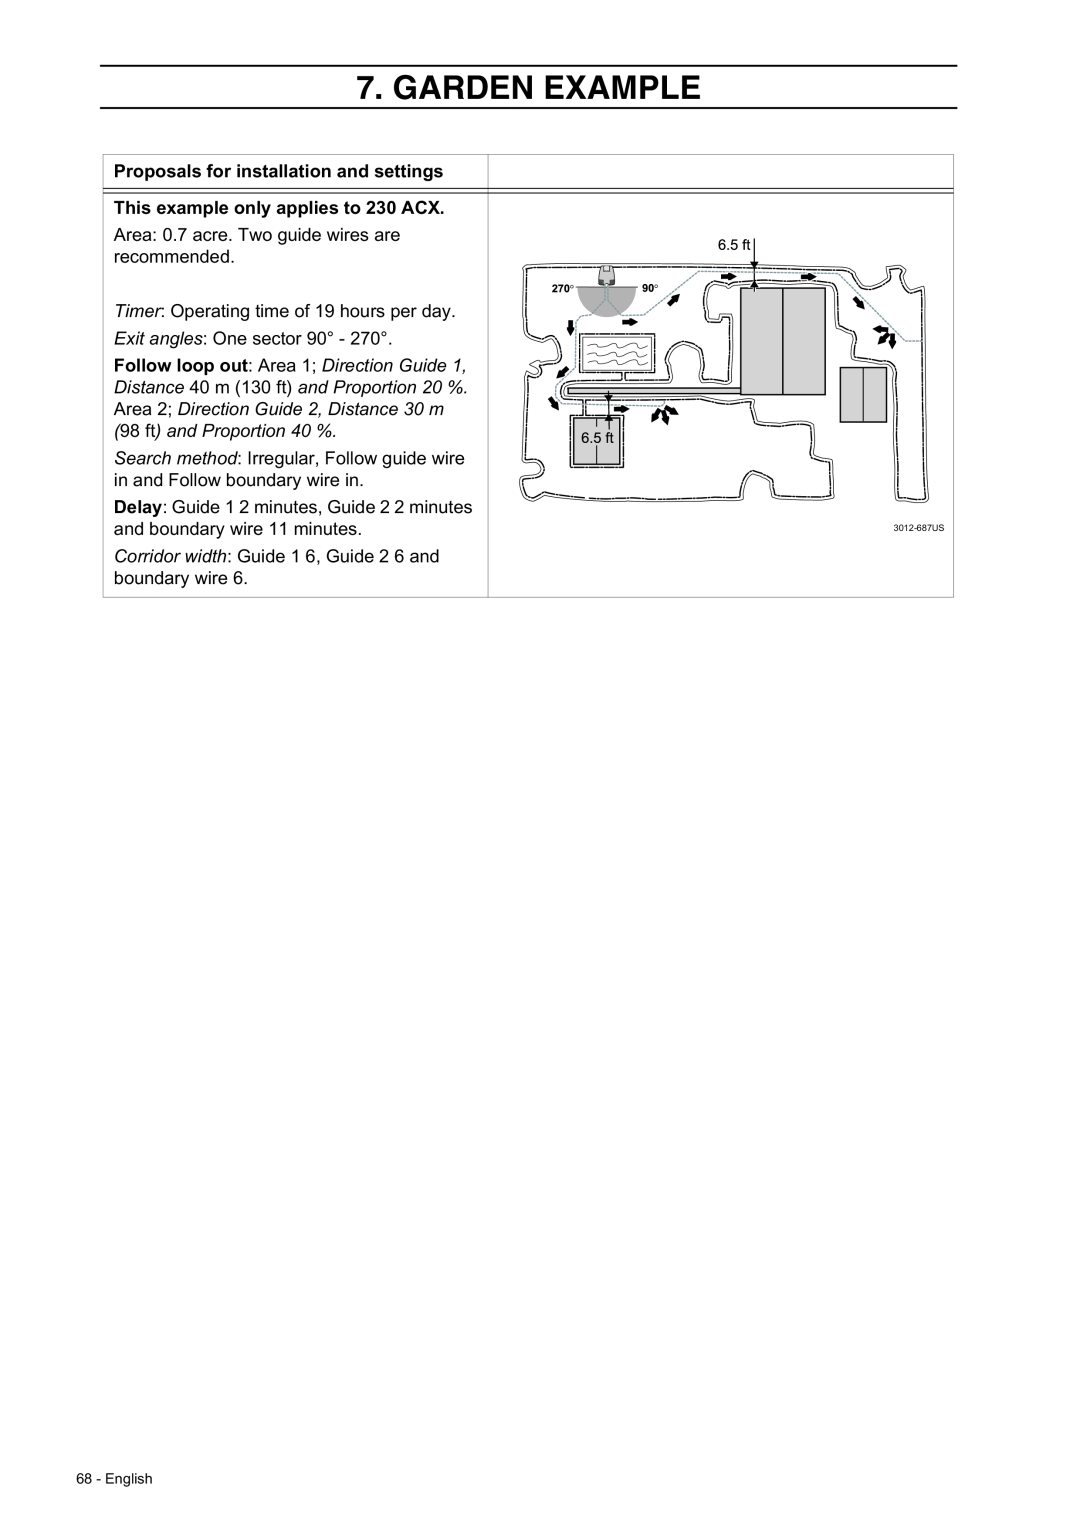 Husqvarna 230 ACX/220 AC Garden Example, Proposals for installation and settings, This example only applies to 230 ACX 